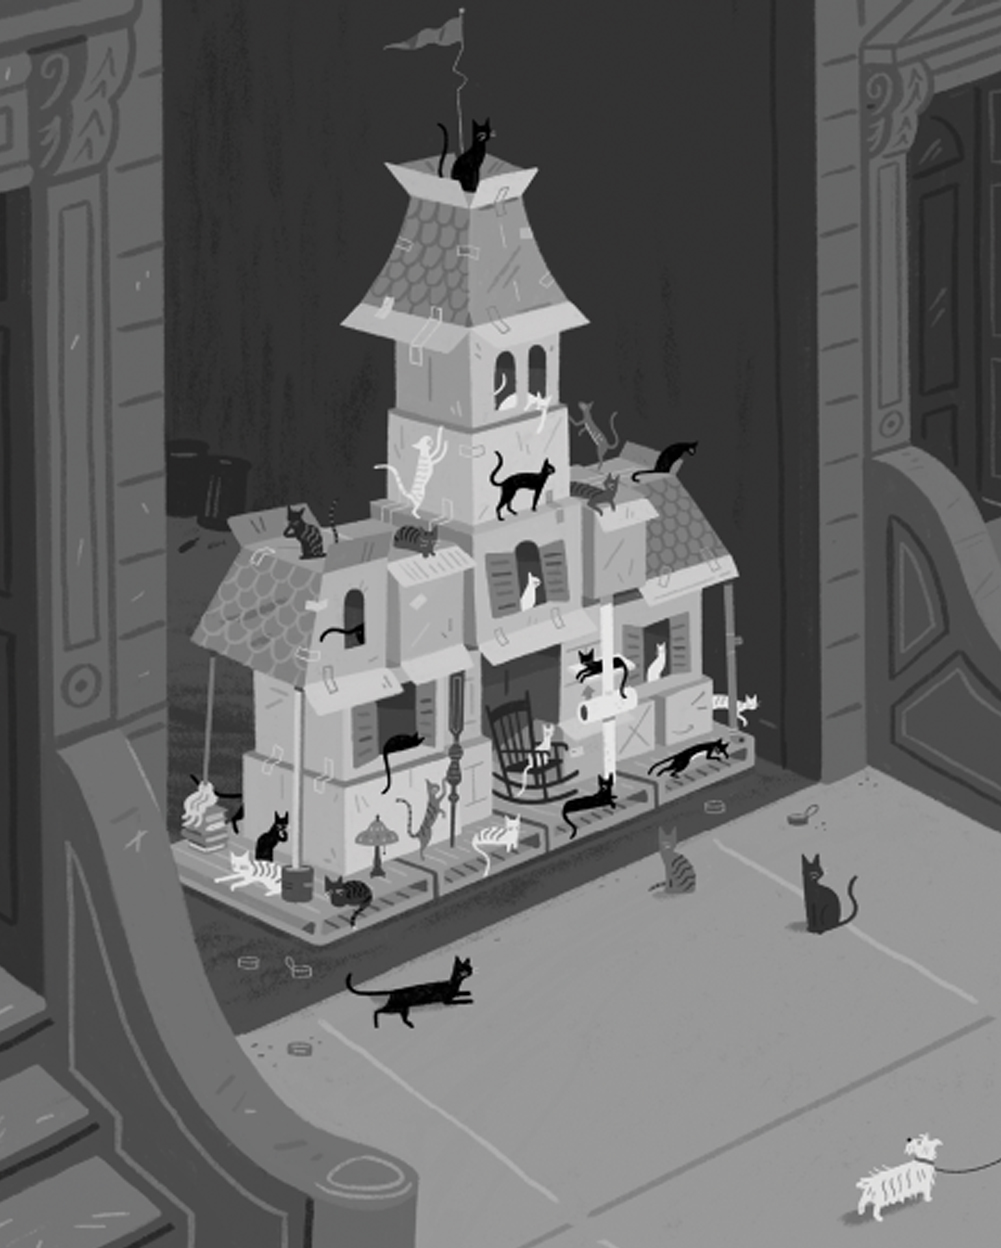 Black and white illustration of cat castle full of cats sits between 2 buildings.